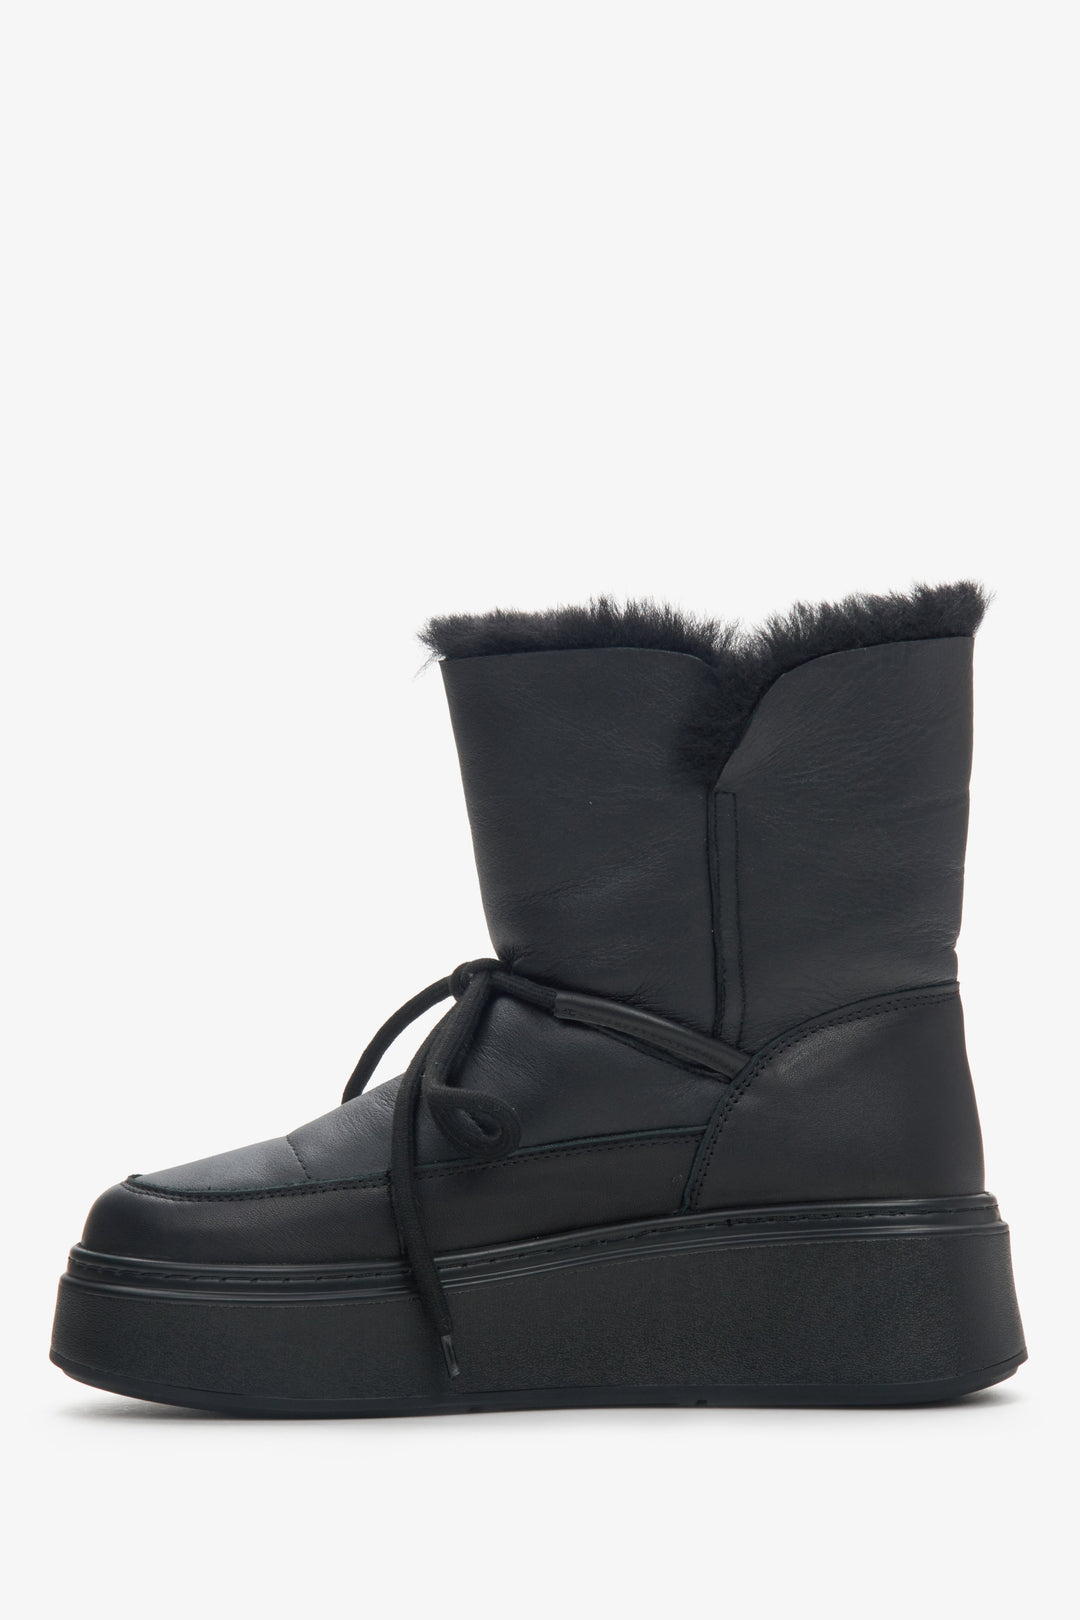 Casual black snow boots made of fur and leather Estro - shoe sideline.